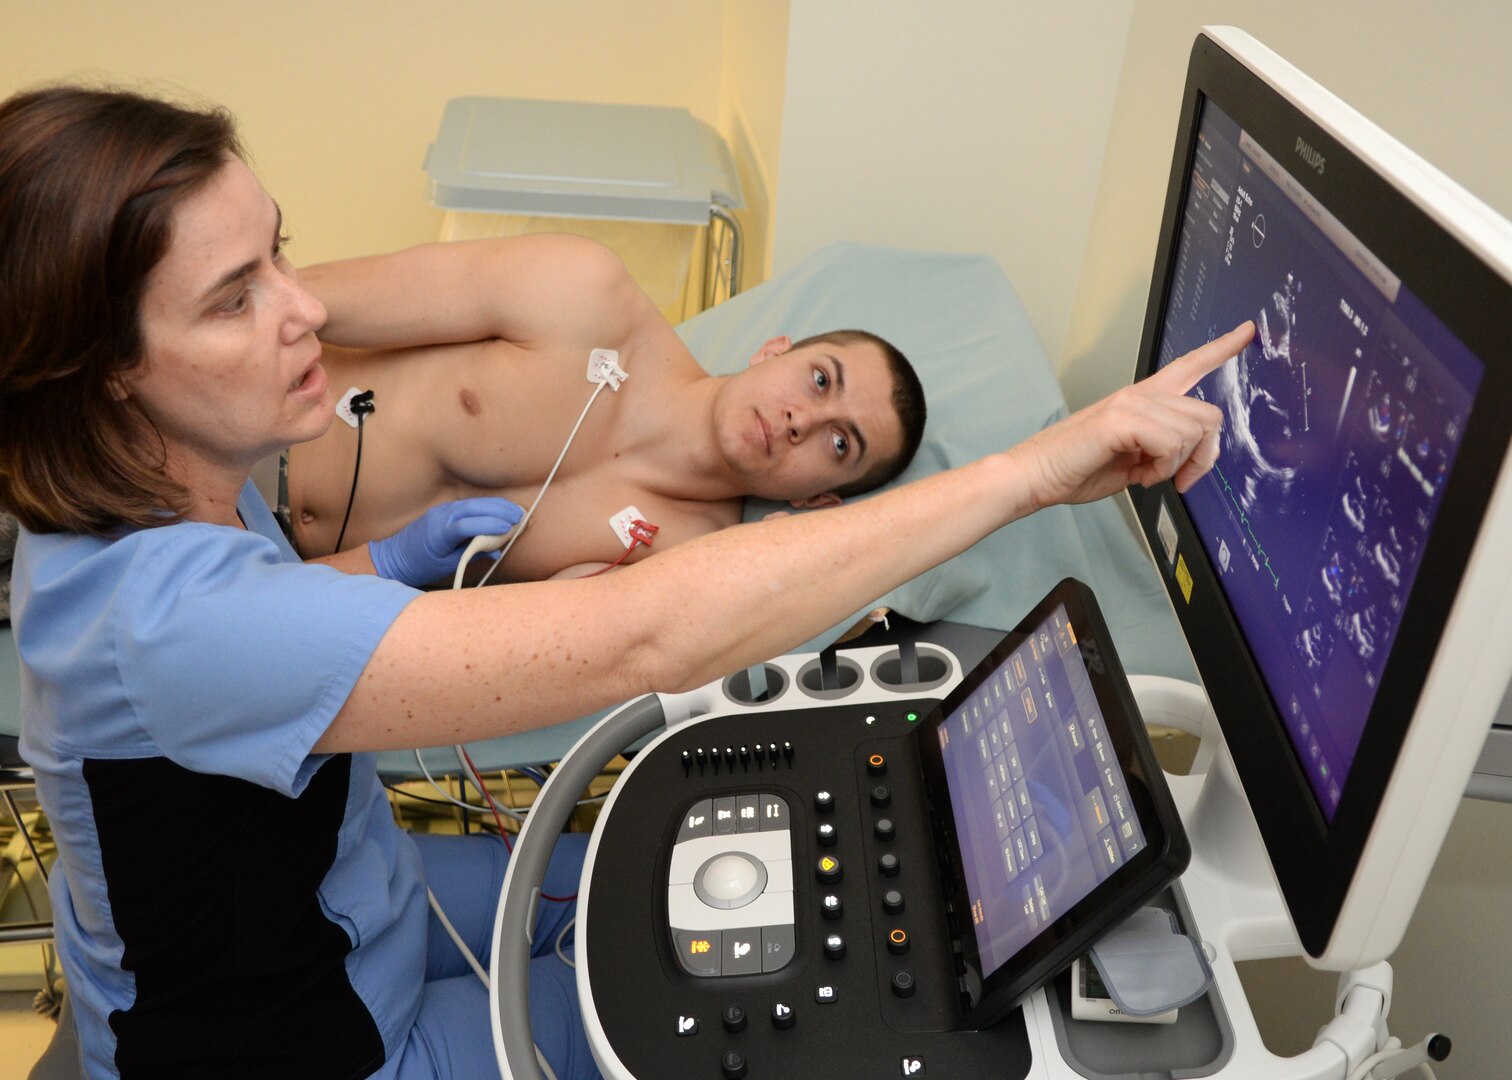 Suzanne Packard, a Cardiology Phase II instructor at Wilford Hall Ambulatory Surgical Center, explains a cardio sonogram to Trenton Moore, Basic Military Training trainee at Joint Base San Antonio-Lackland, Texas, during the Basic Military Training Fast Track program Feb. 28, 2018. The 59th Medical Wing’s weekly program gives trainees in BMT technical school on cardiology-related medical hold a singular location to have their issues tested and identified.